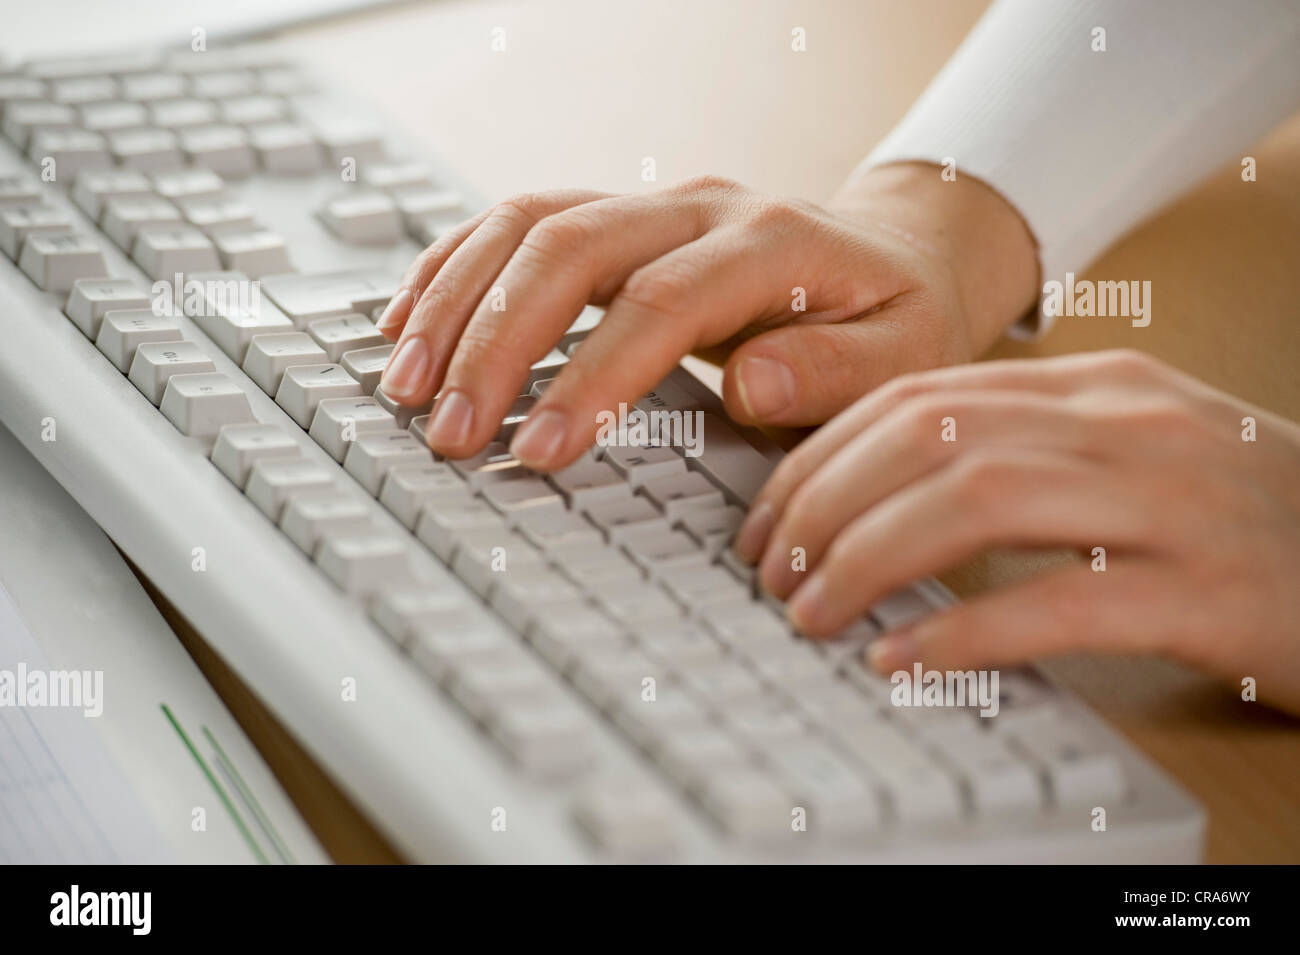 Hands on a computer keyboard Stock Photo